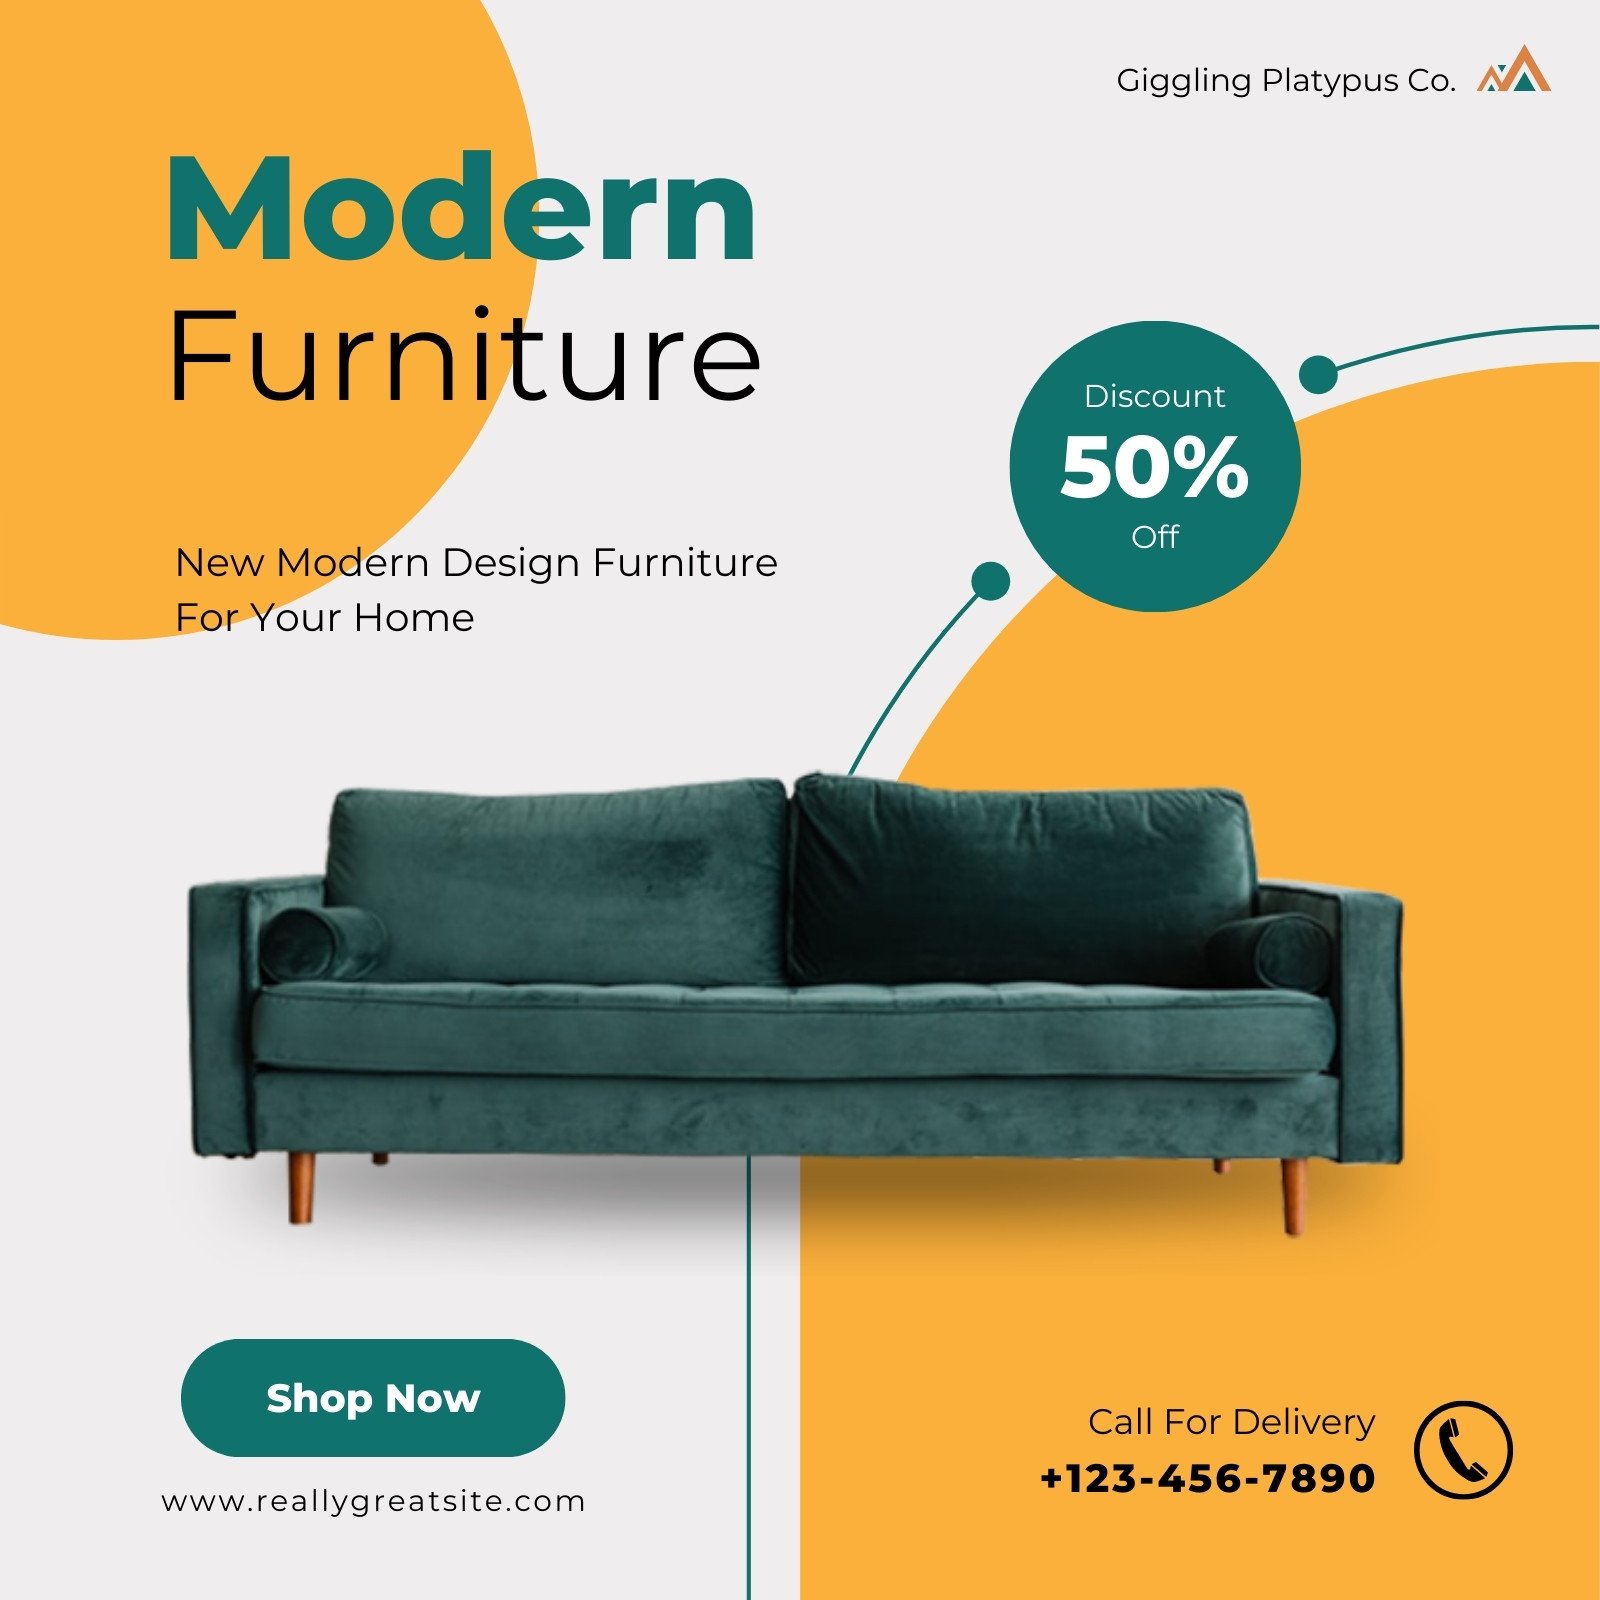 Free furniture samples by post